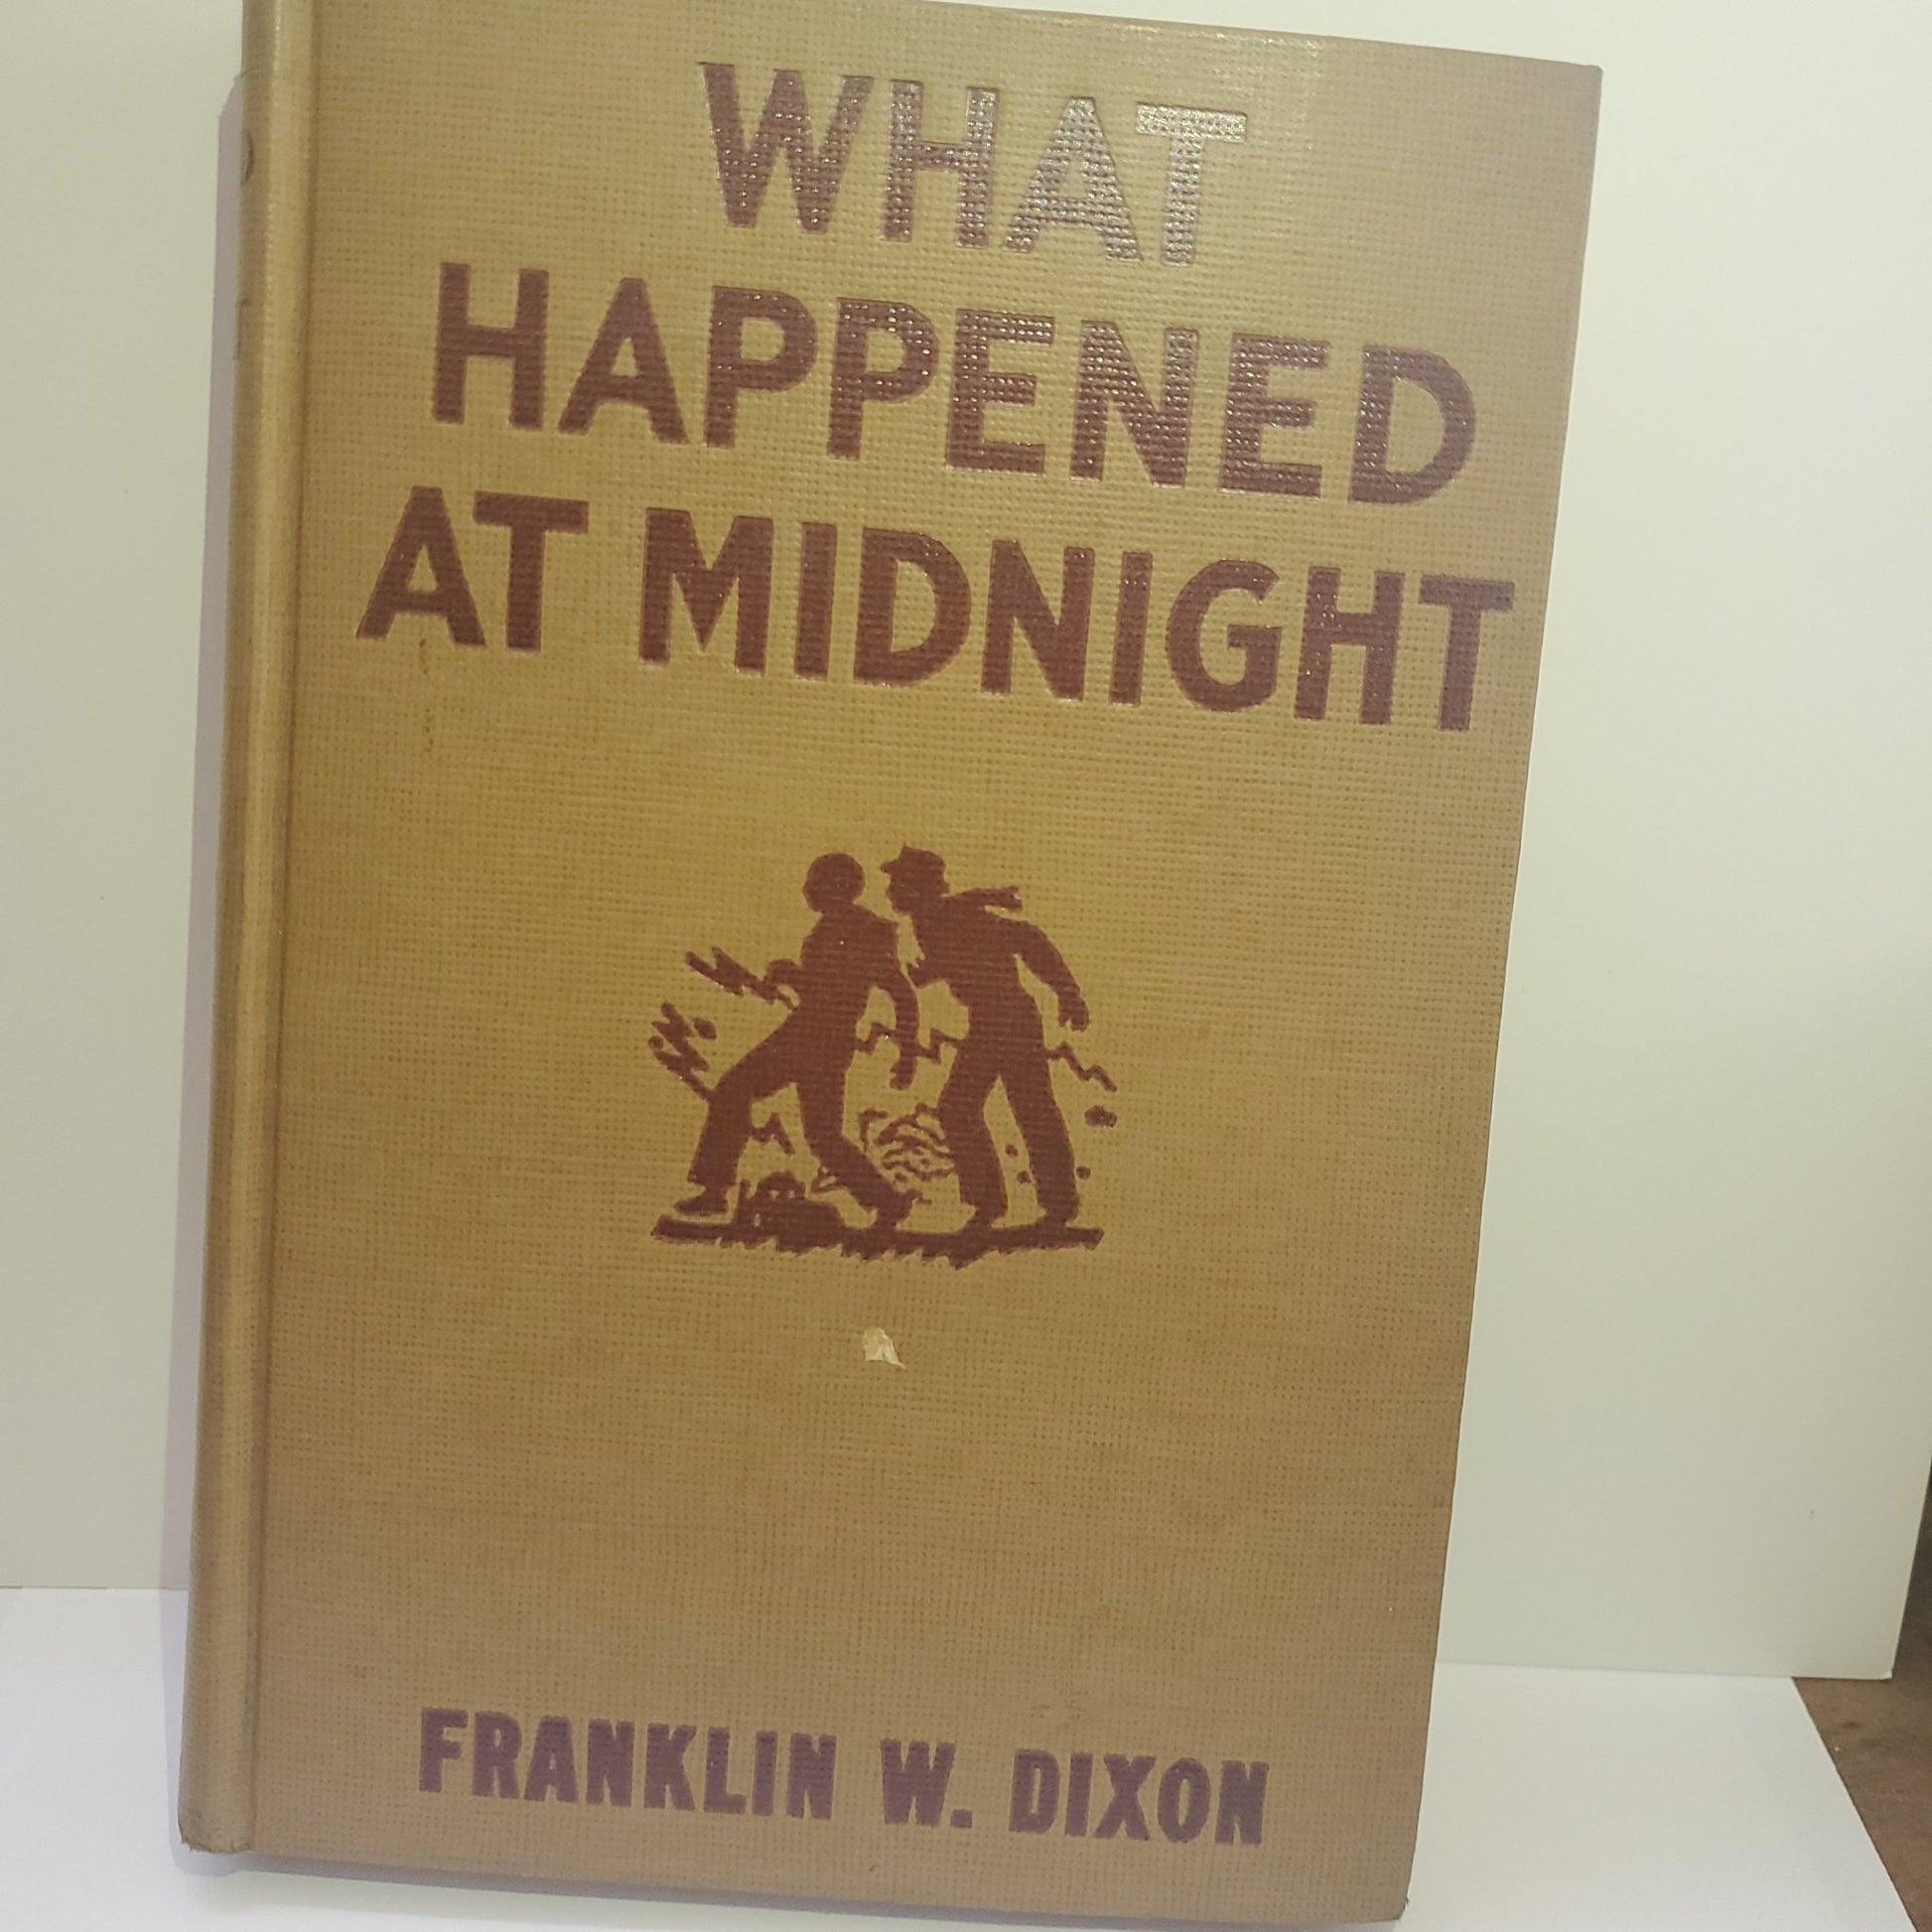 What Happened At Midnight - [ash-ling] Booksellers